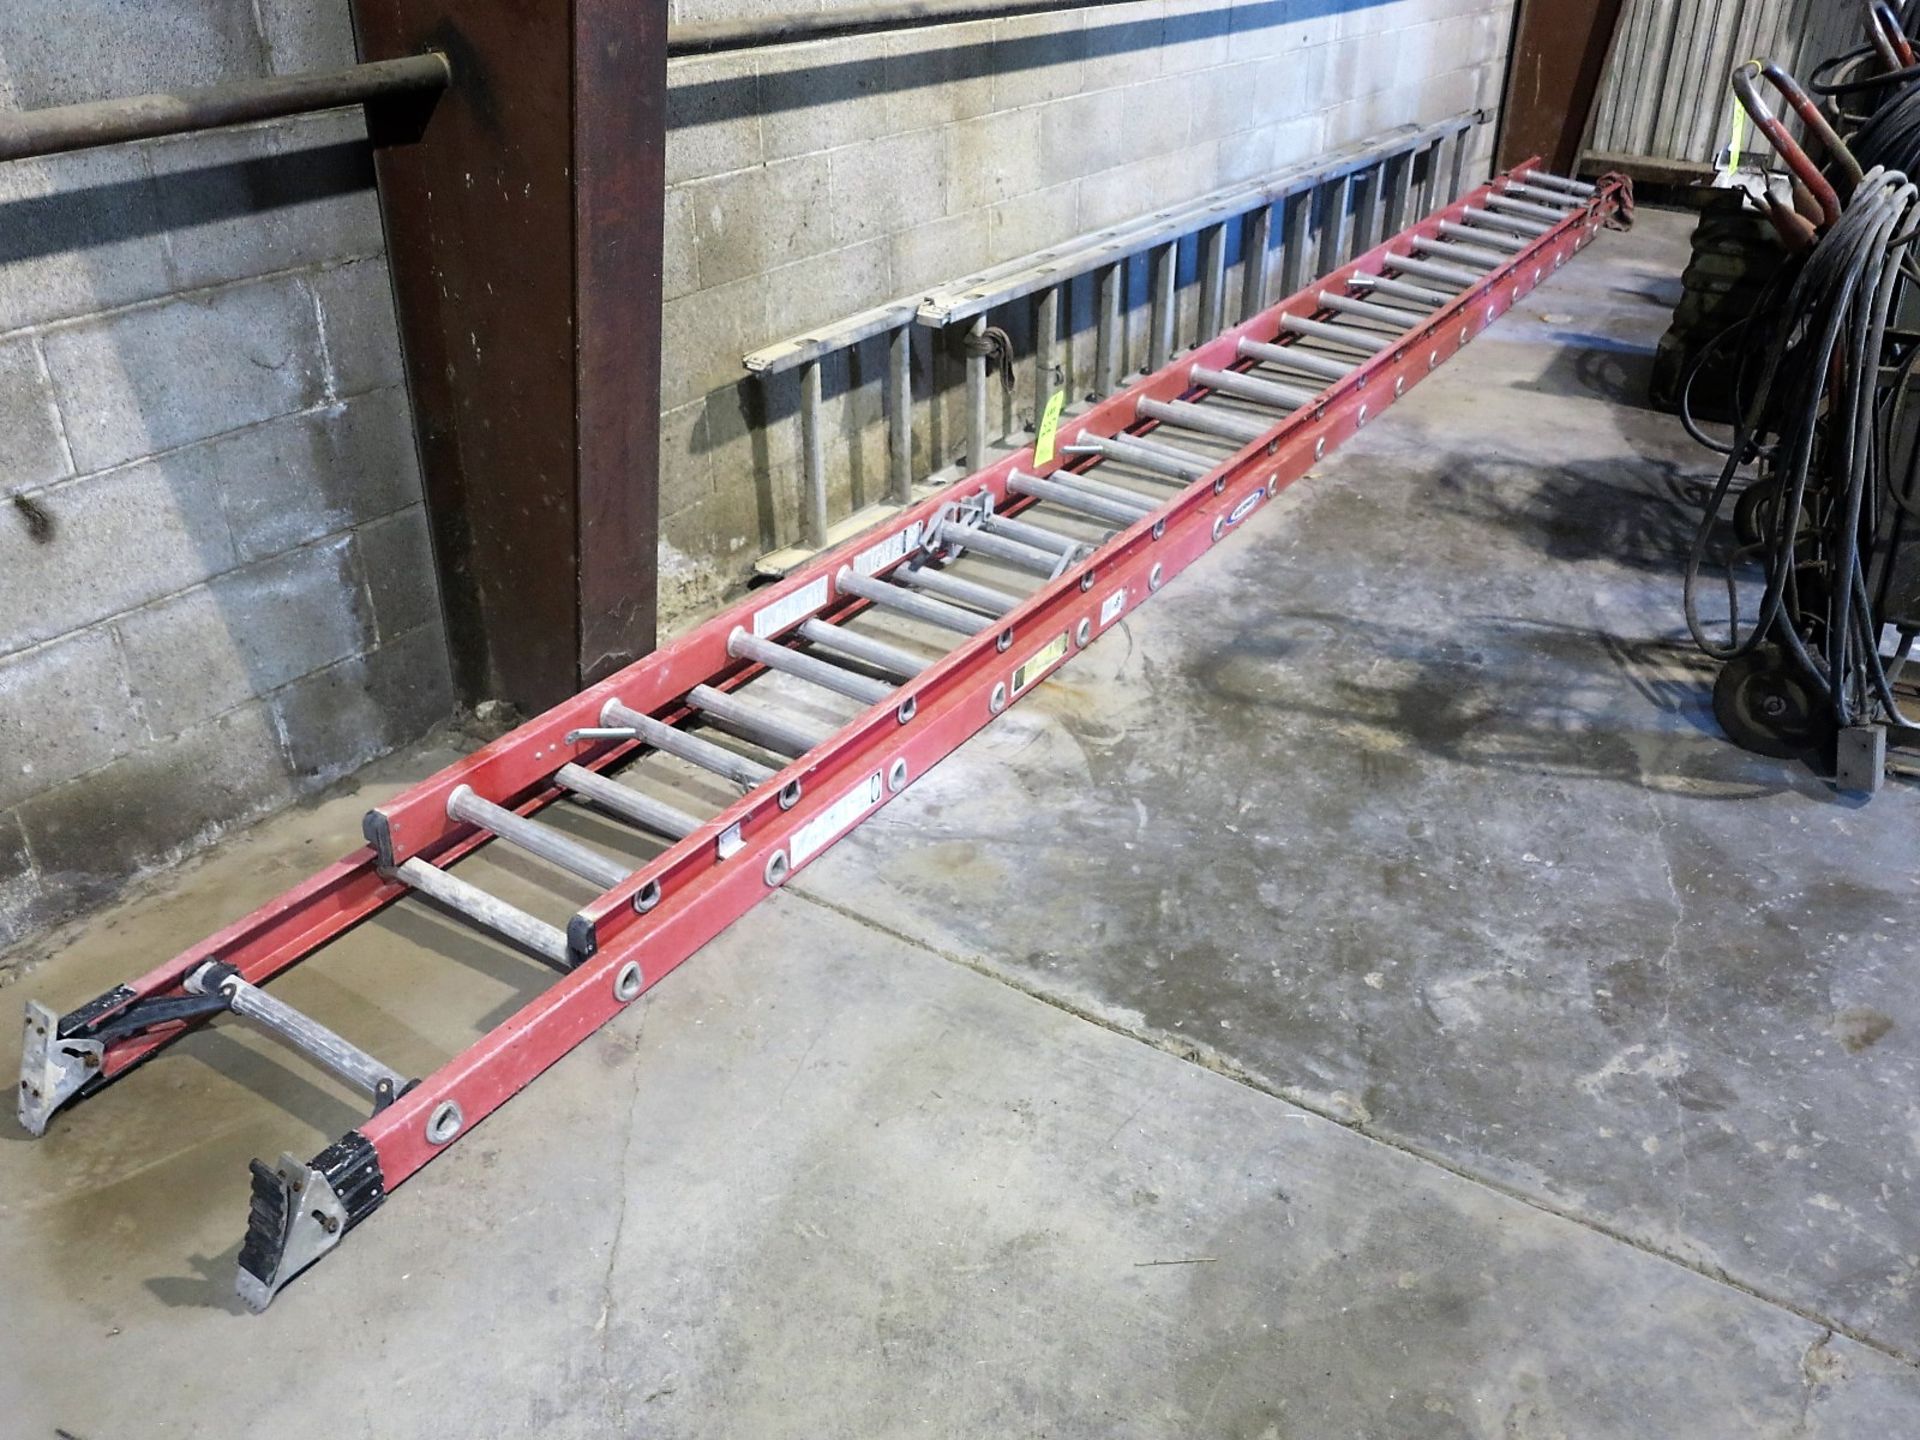 (2) LADDERS, 24' EXTENTIONS/FIGBERGLASS, 1-12' EXTENTION